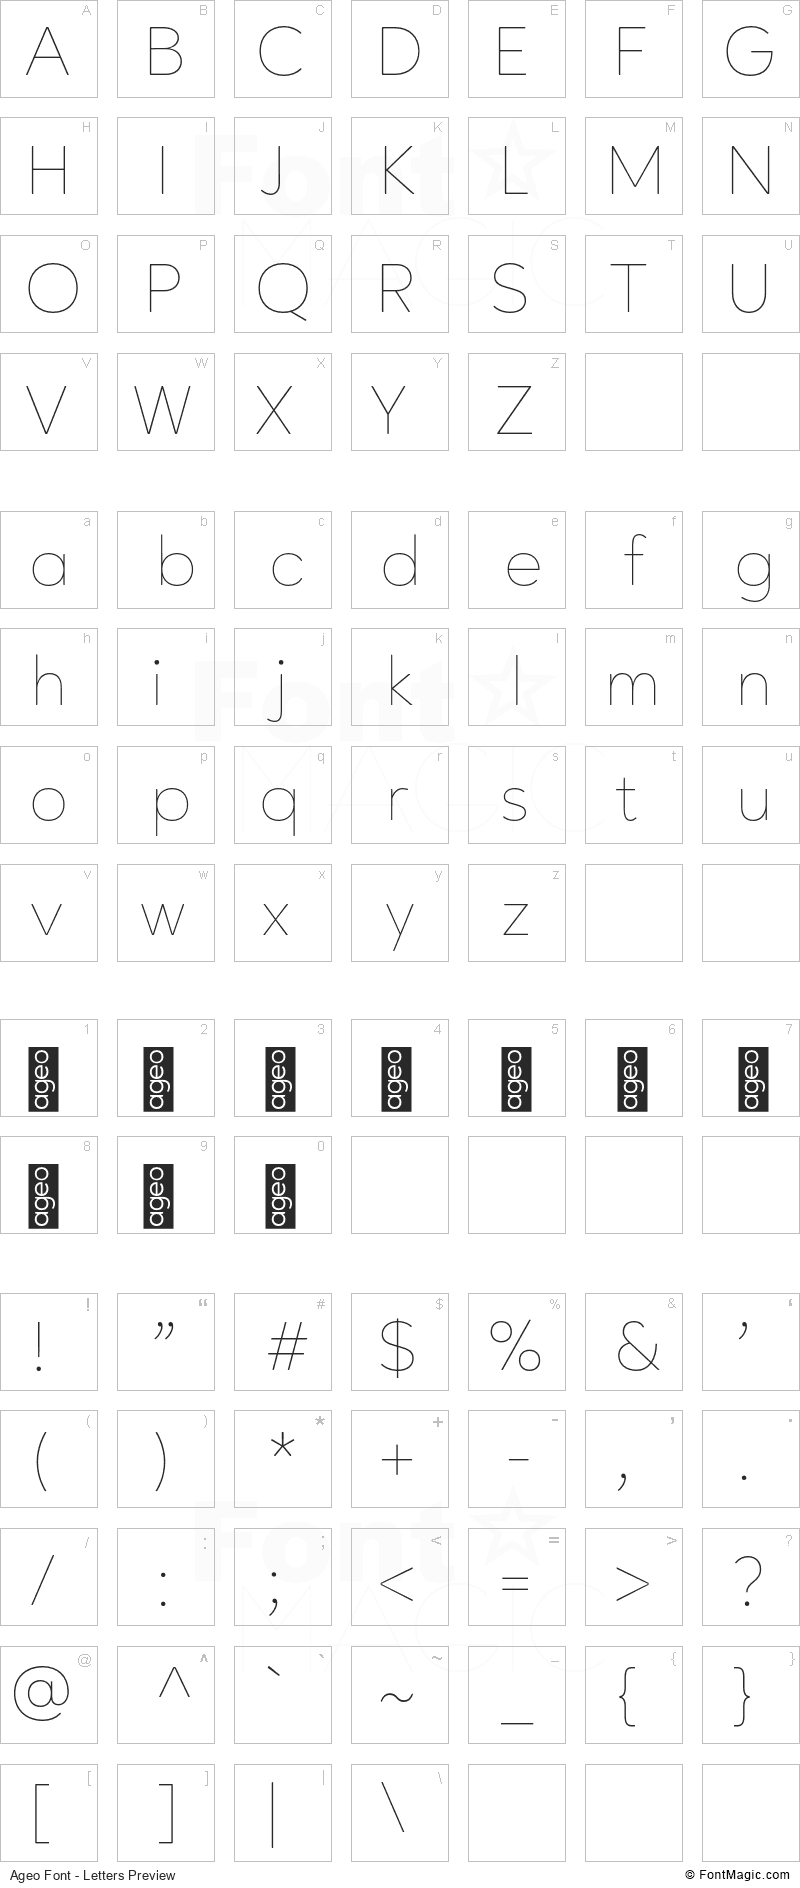 Ageo Font - All Latters Preview Chart